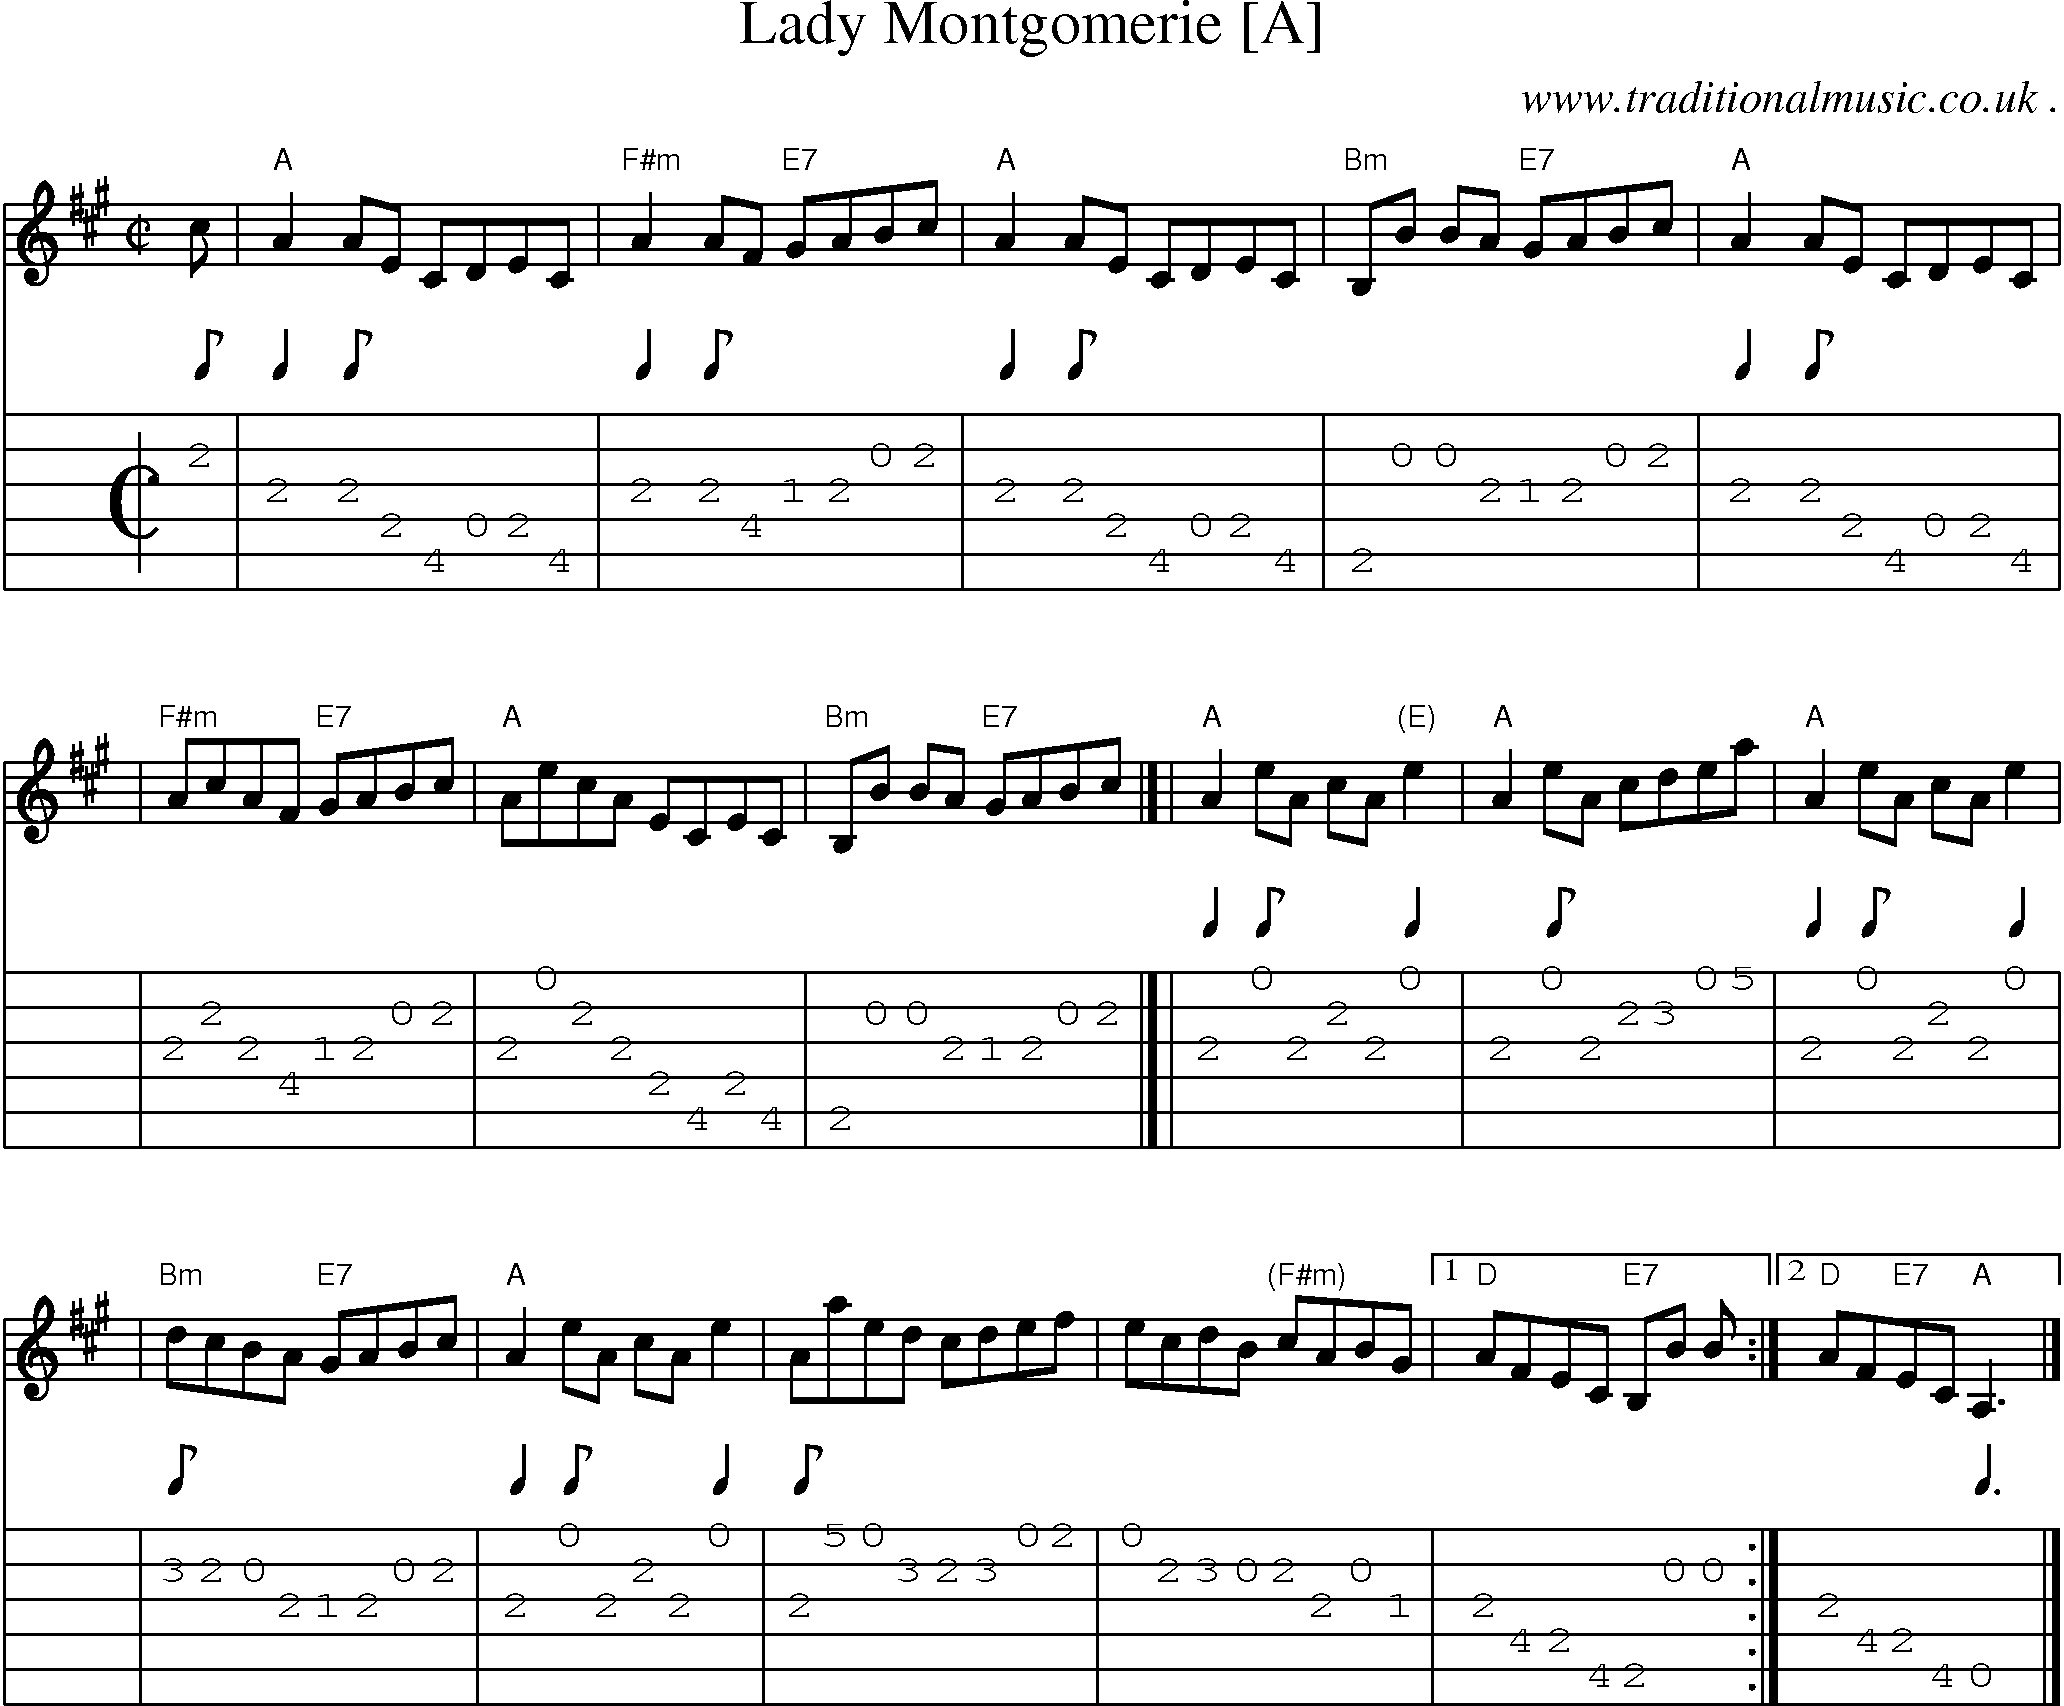 Sheet-music  score, Chords and Guitar Tabs for Lady Montgomerie [a]